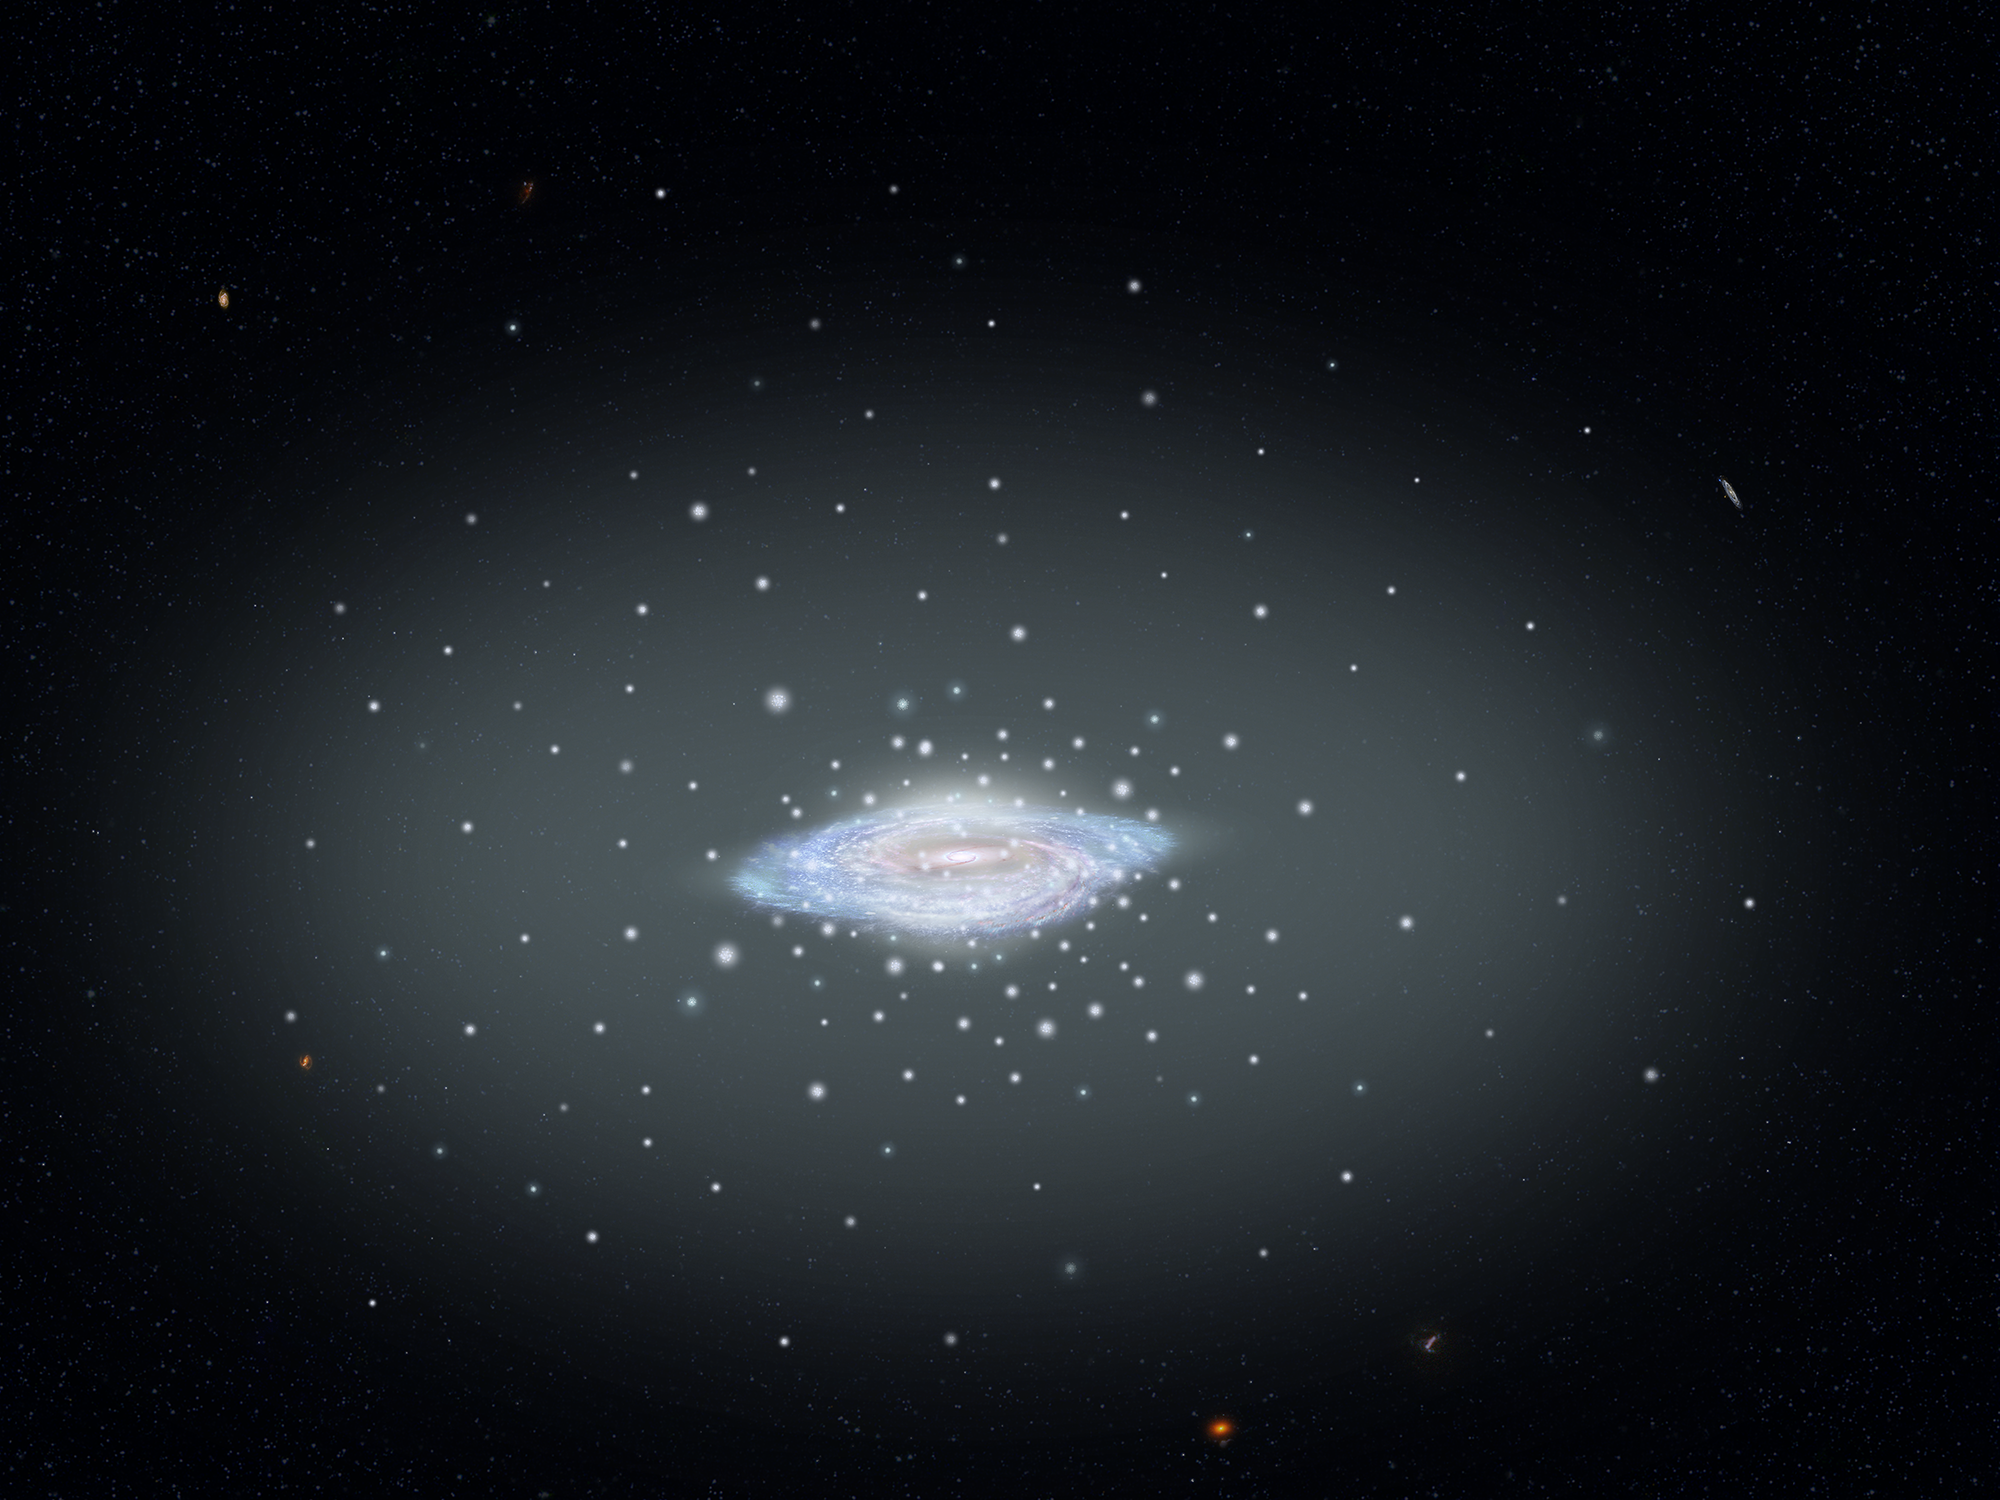 A galaxy surrounded by a hazy cloud dotted with bright blobs